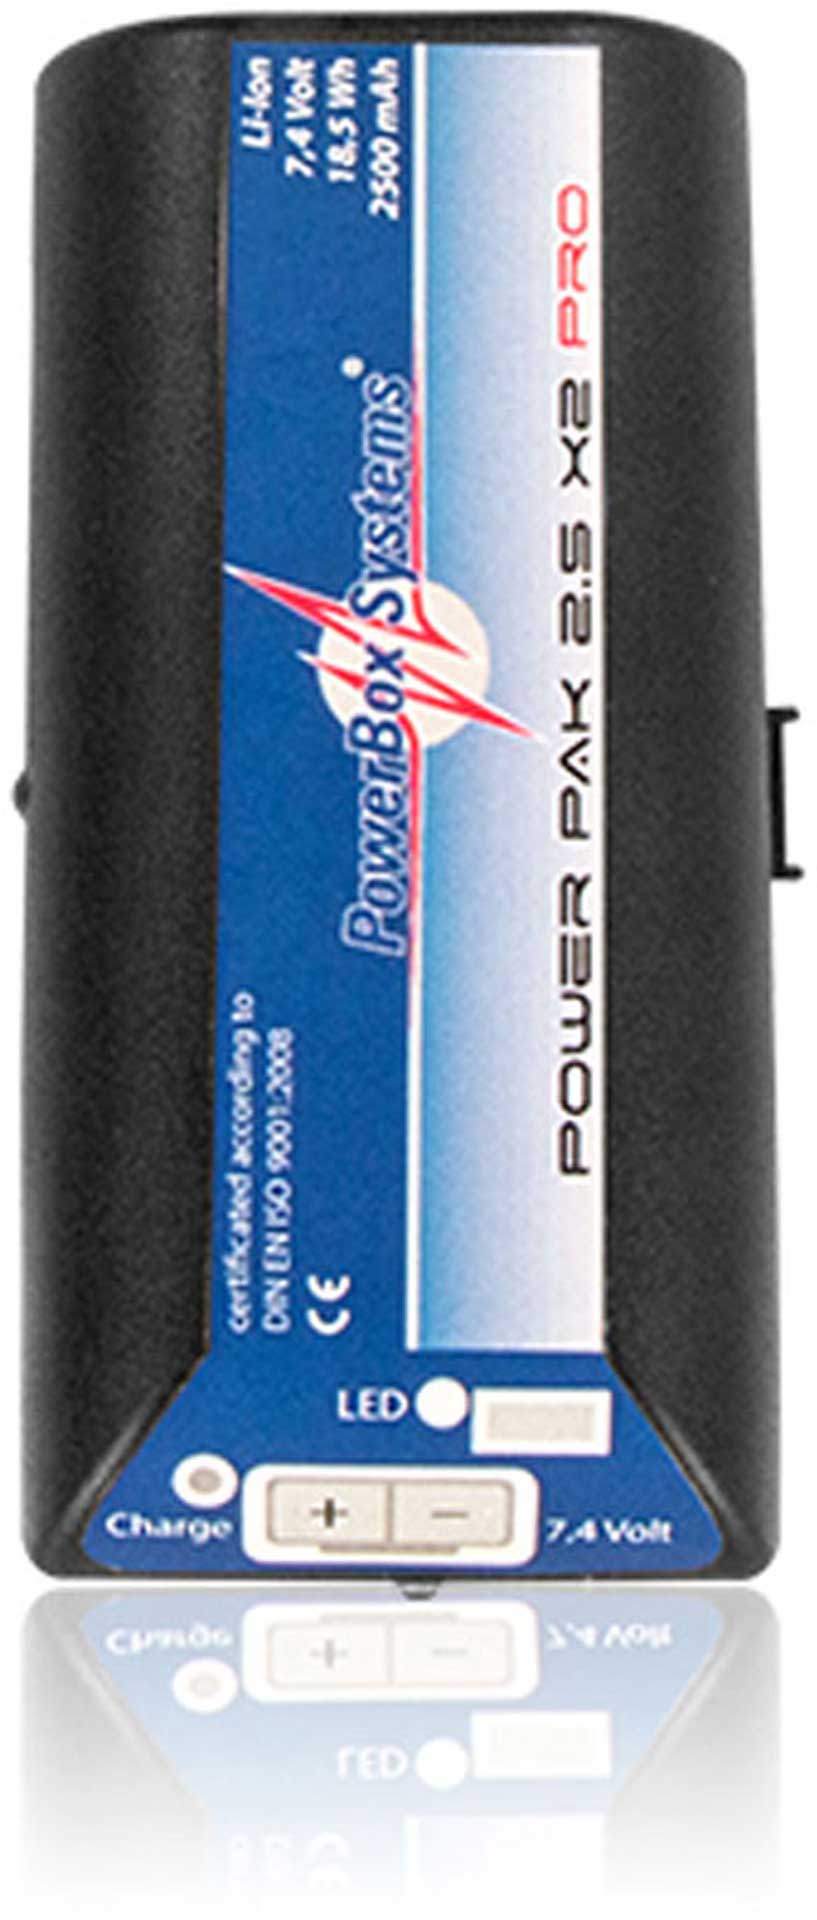 POWERBOX SYSTEMS POWERPAK 2.5X2 PER 2500MAH 7,4V WITH INTEGRATED CHARGING AND SAFETY ELEC